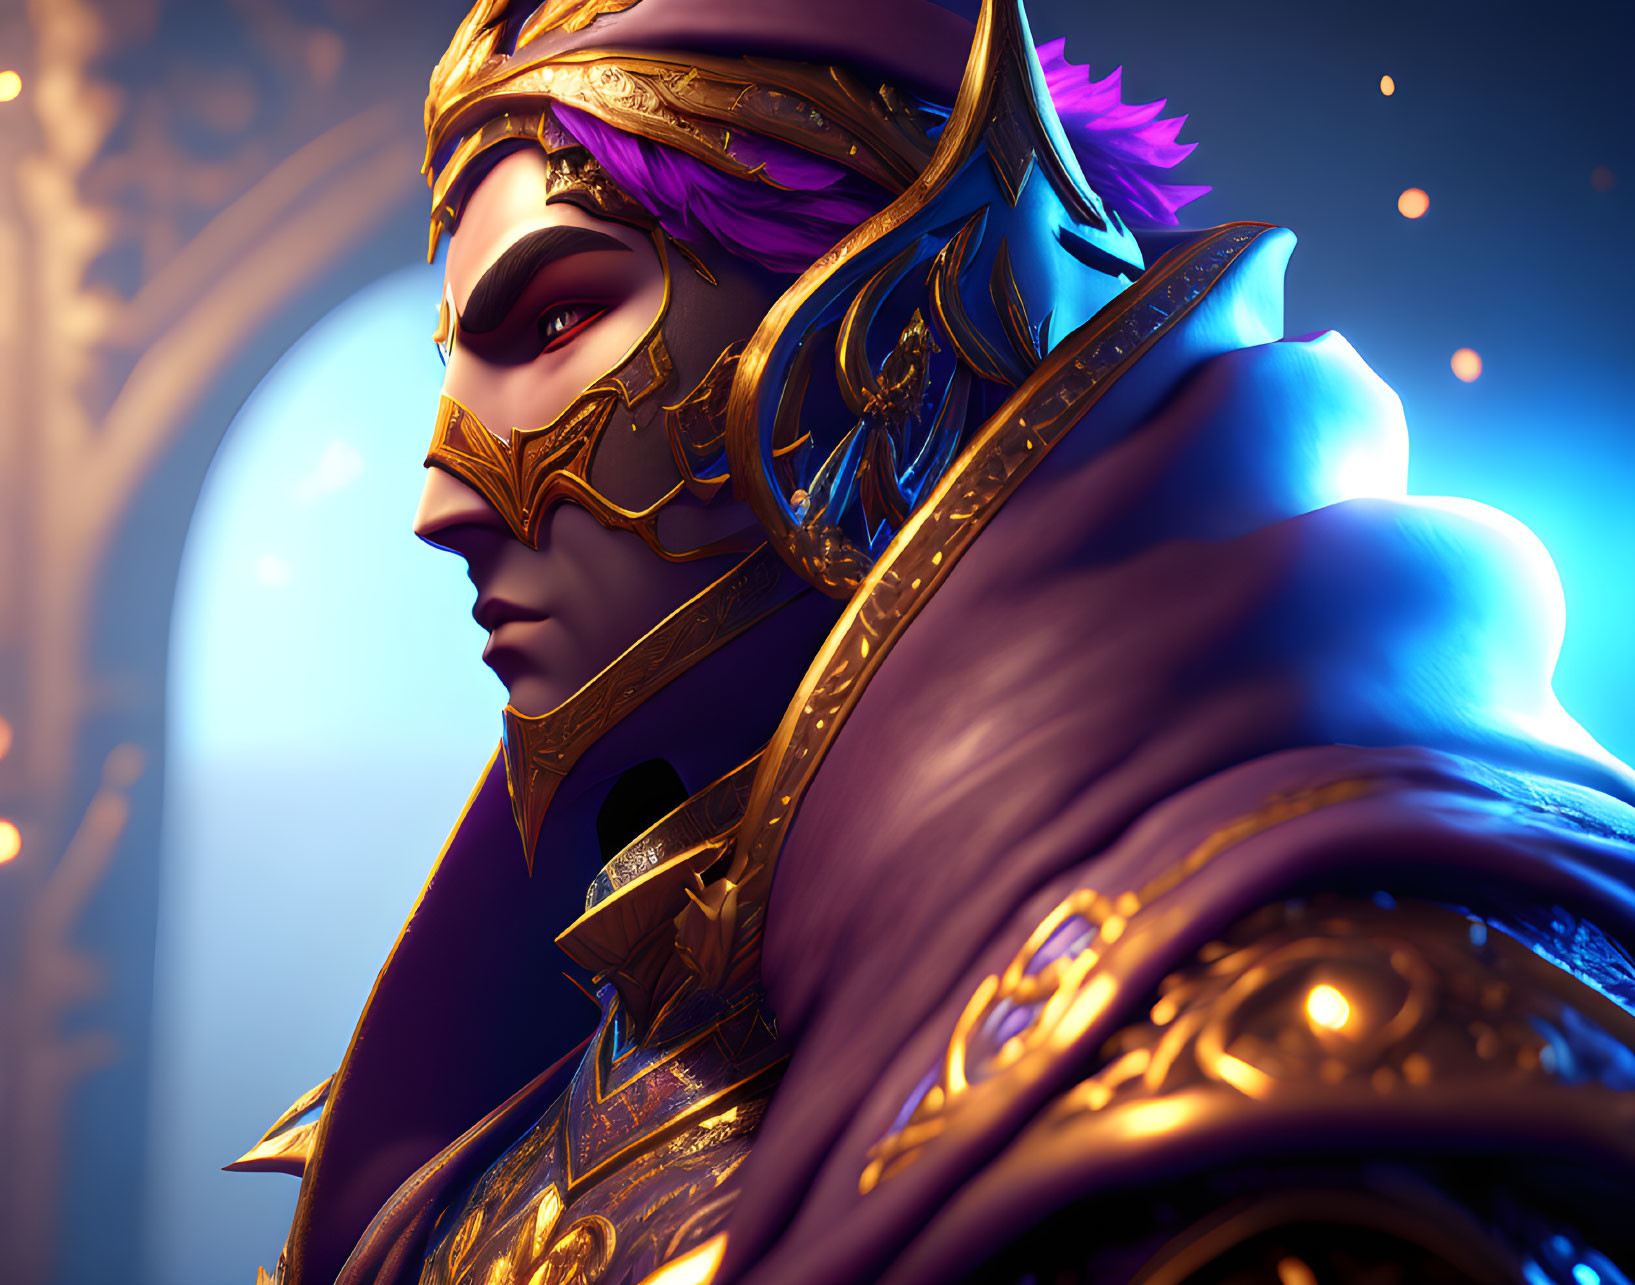 Regal character in golden mask and purple cloak against warm bokeh backdrop